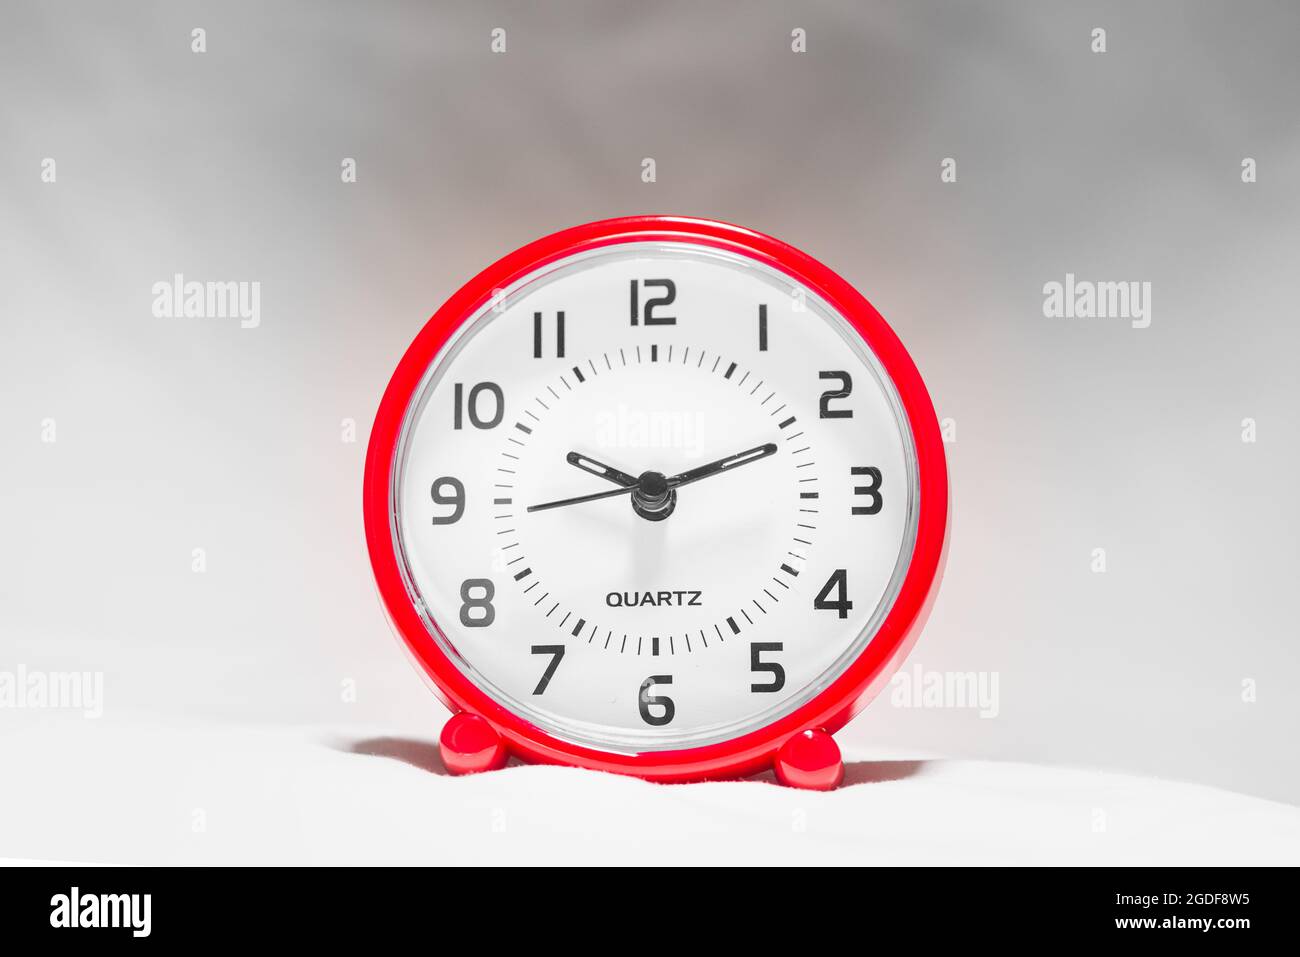 https://c8.alamy.com/comp/2GDF8W5/small-red-alarm-clock-show-the-running-time-a-modern-clock-with-red-frame-smile-face-of-a-clock-close-up-on-a-red-plastic-watch-with-second-pointer-2GDF8W5.jpg